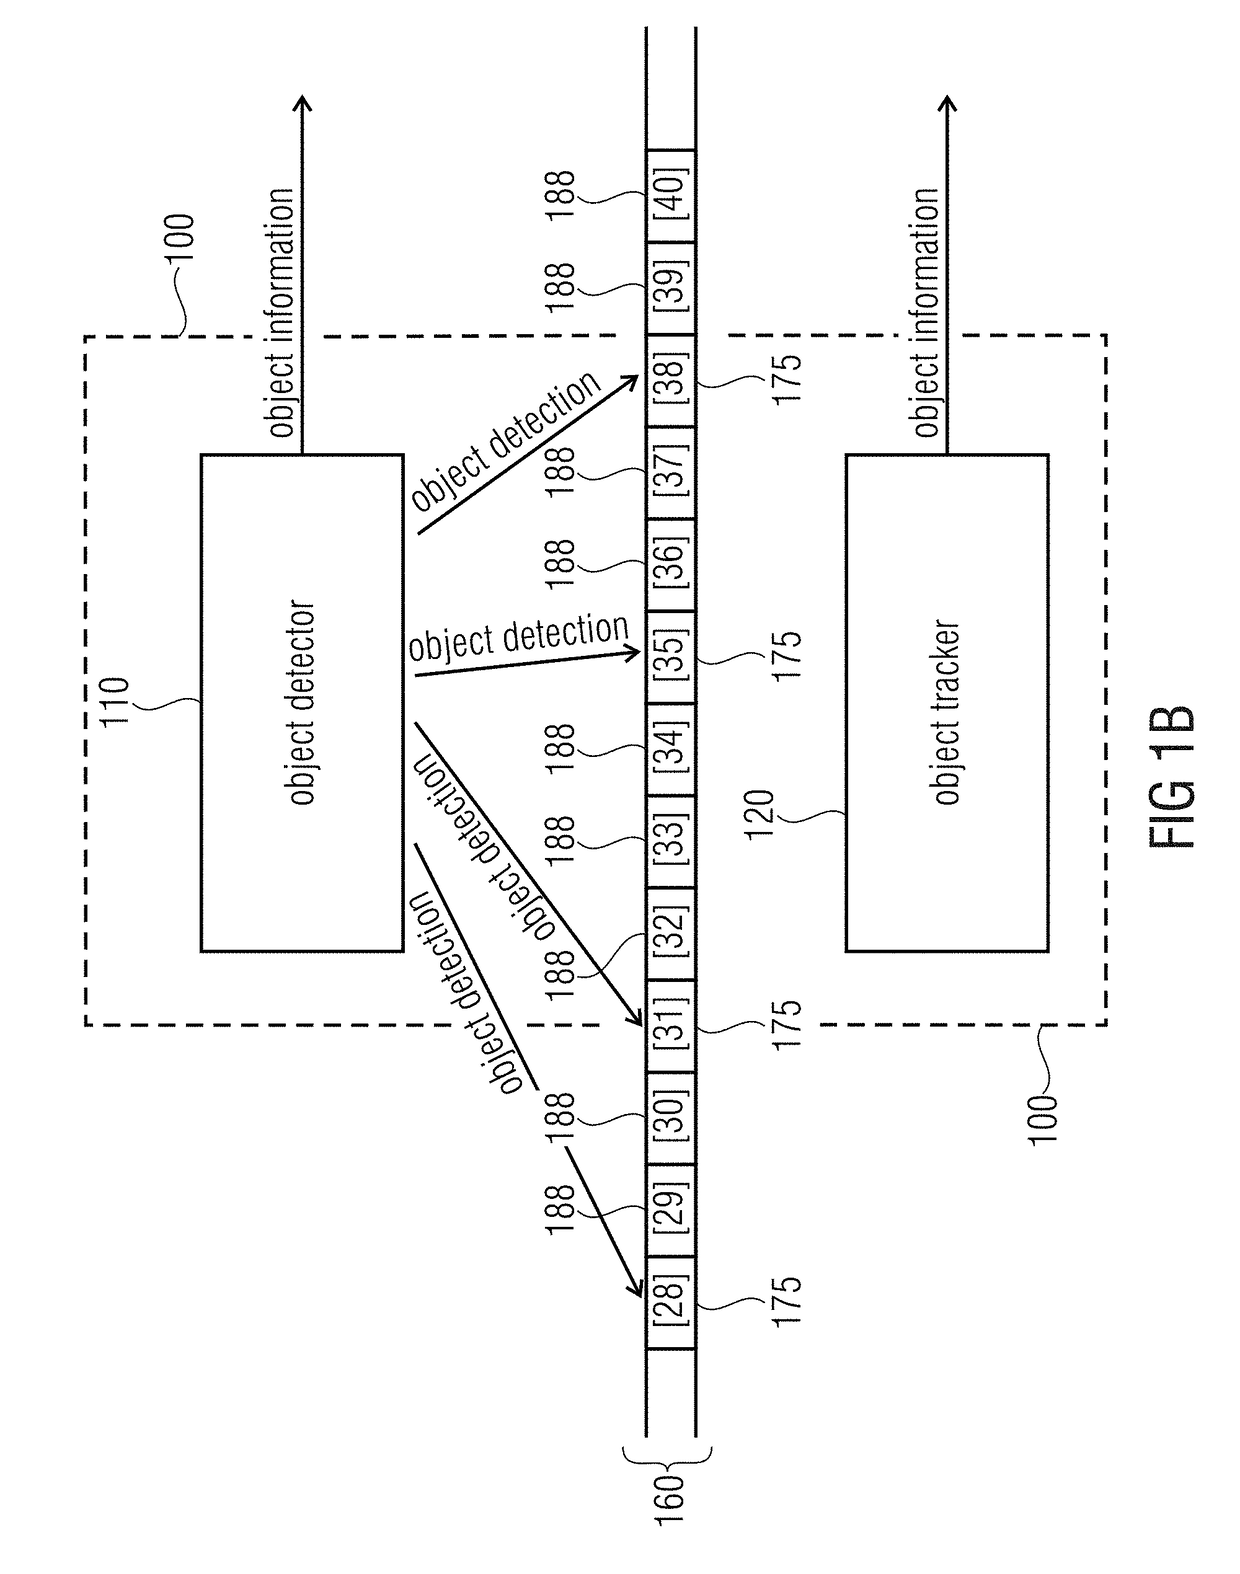 Apparatus and method for resource-adaptive object detection and tracking